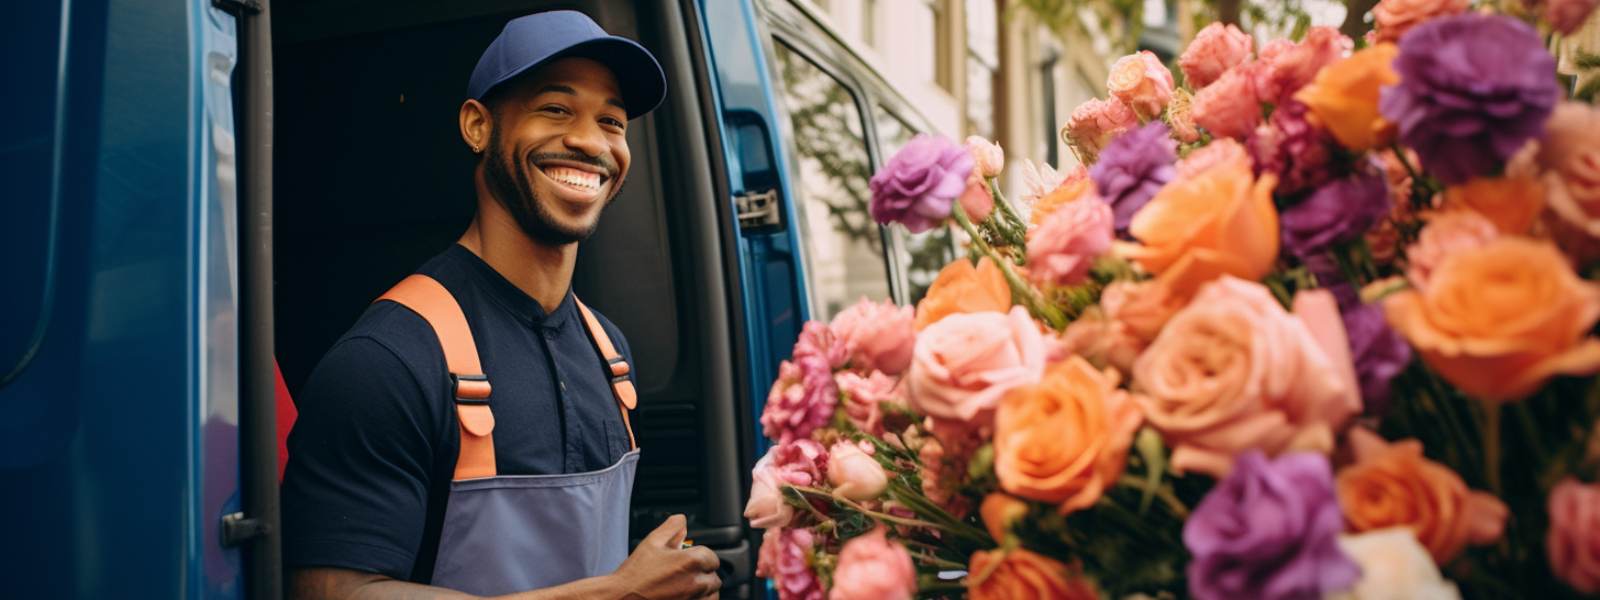 flower delivery to Cape Town, South Africa, delivery man smiling wiht cap and orange and pink roses and ranunculus - Fabulous Flowers